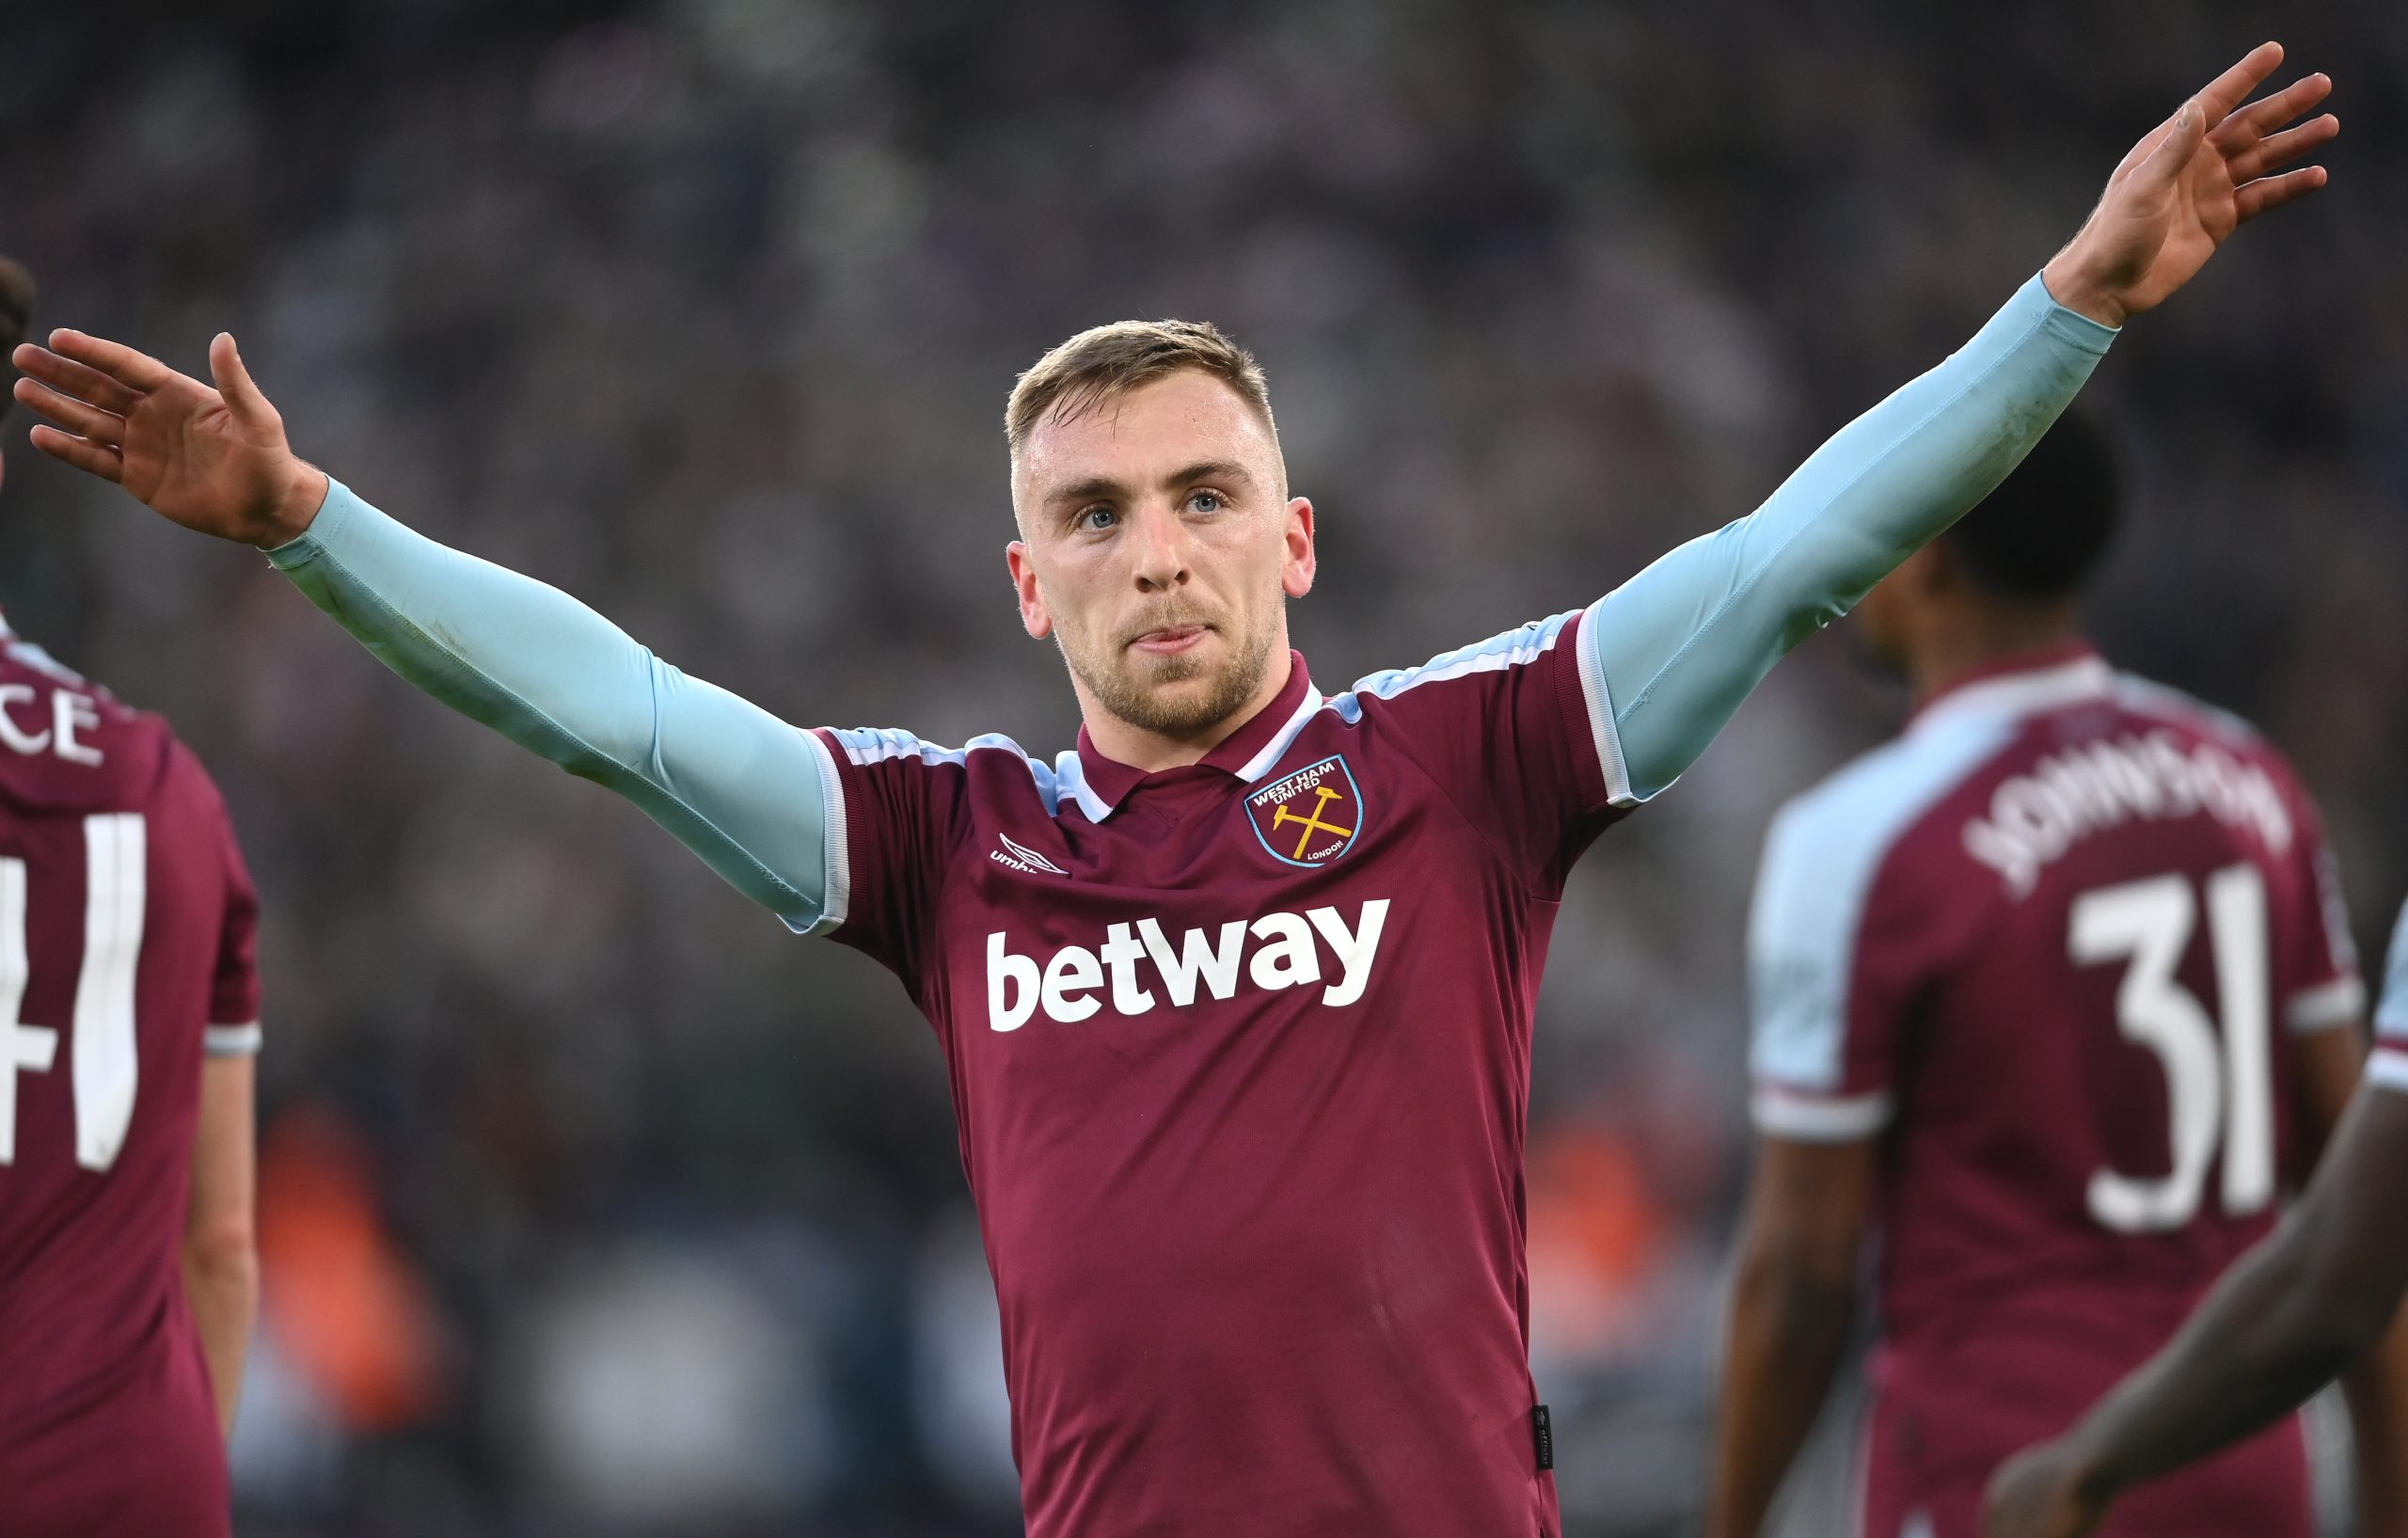 LONDON, ENGLAND - JANUARY 09: Jarrod Bowen of West Ham United celebrates after scoring their side's second goal during the Emirates FA Cup Third Round match between West Ham United and Leeds United at London Stadium on January 09, 2022 in London, England. (Photo by Mike Hewitt/Getty Images)The 4th Official uses images provided by the following image agency:
Getty Images (https://www.gettyimages.de/)
Imago Images (https://www.imago-images.de/)